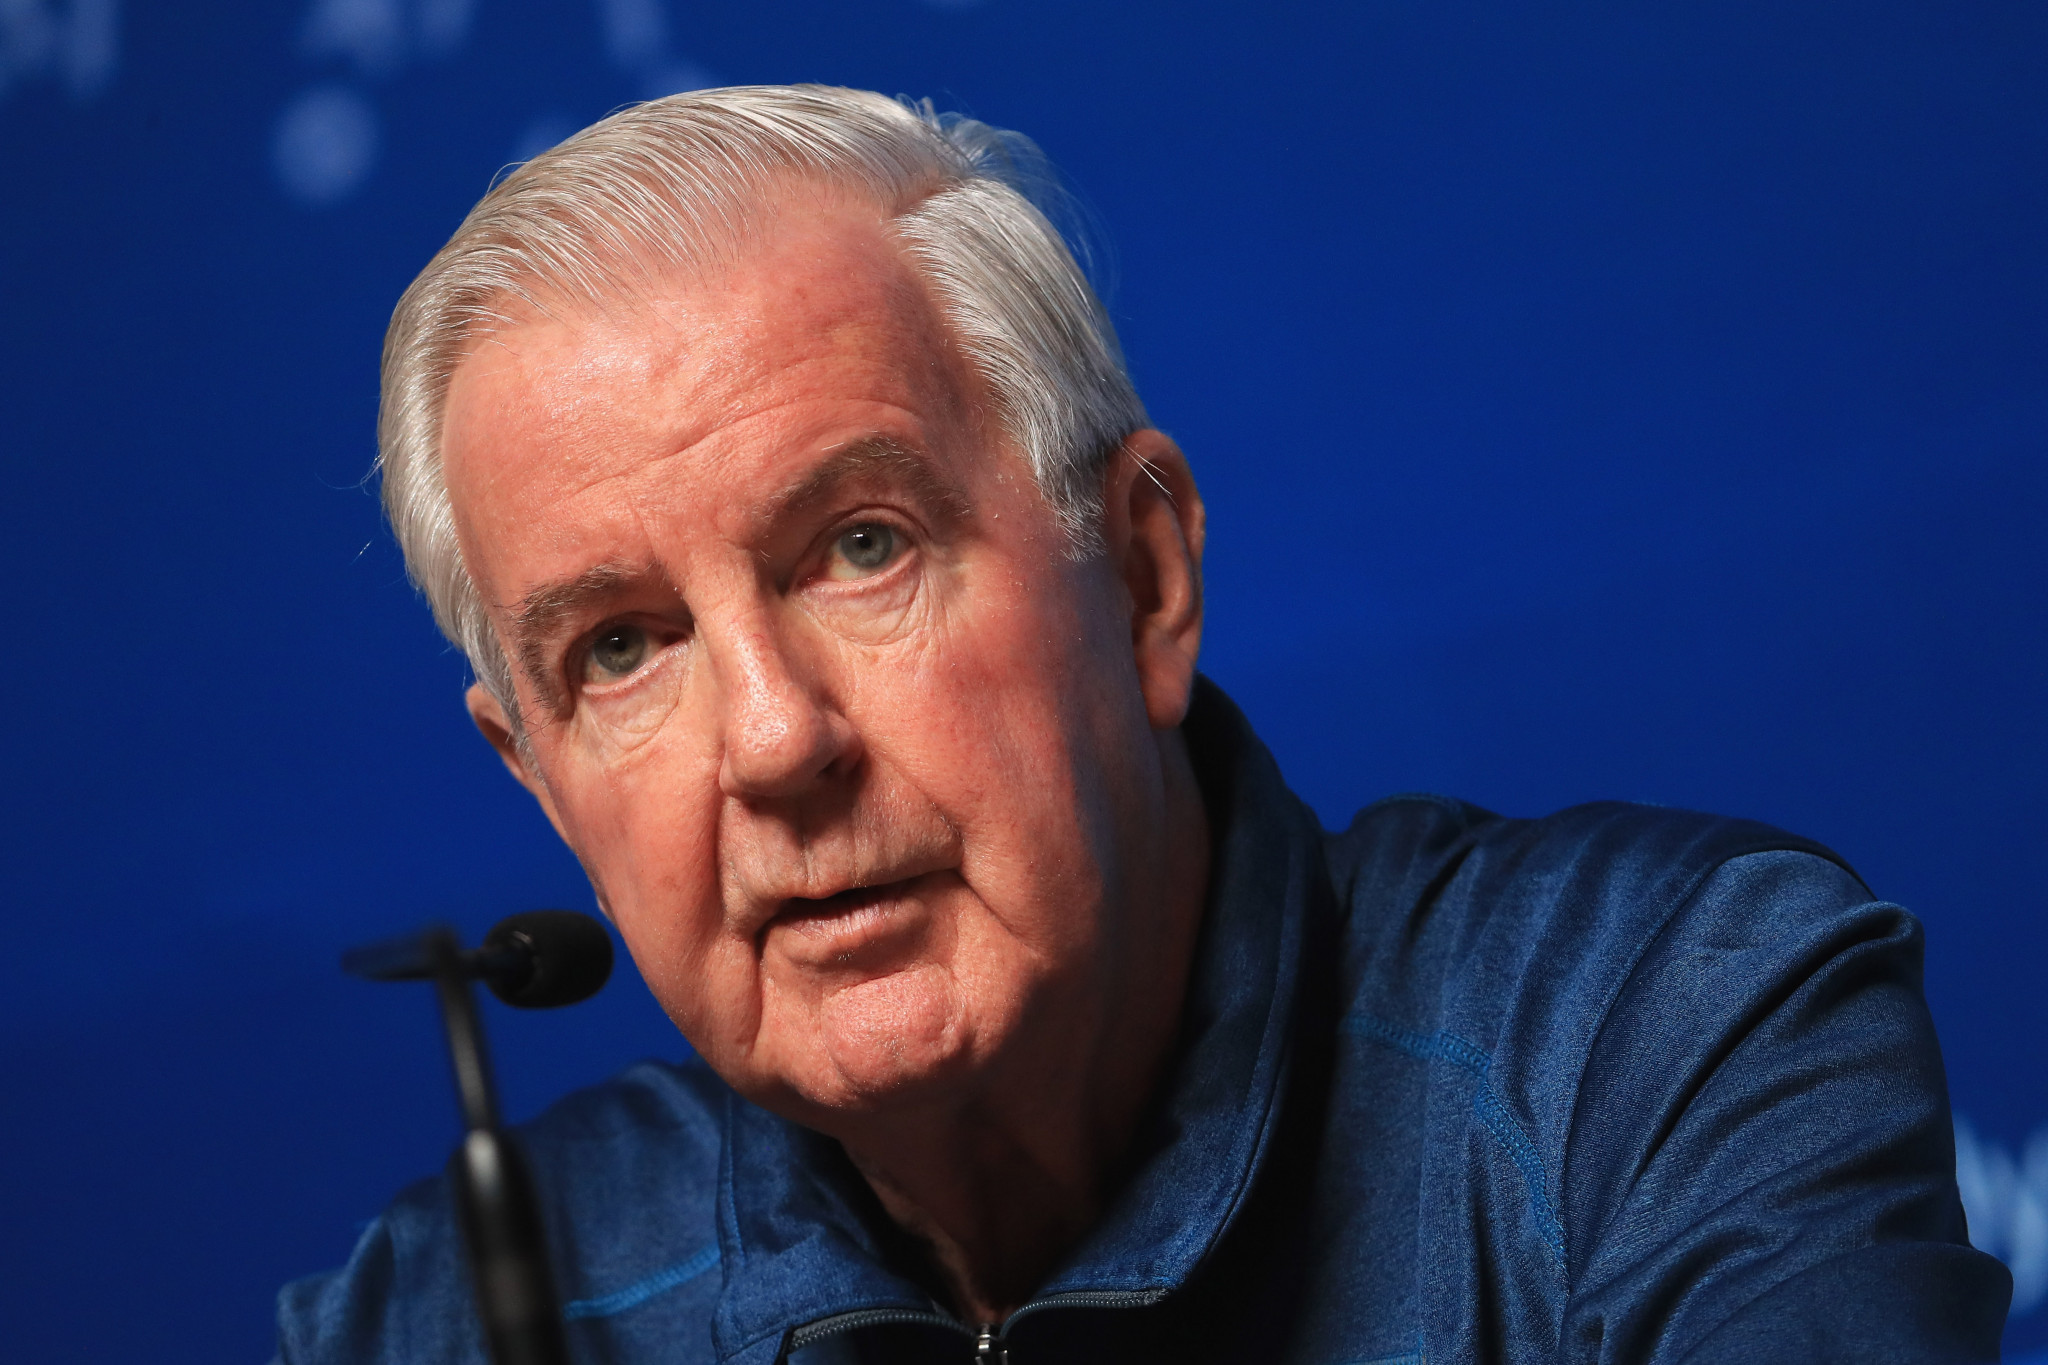 WADA President Sir Craig Reedie has suggested RUSADA could still face being made non-compliant even if data is provided ©Getty Images